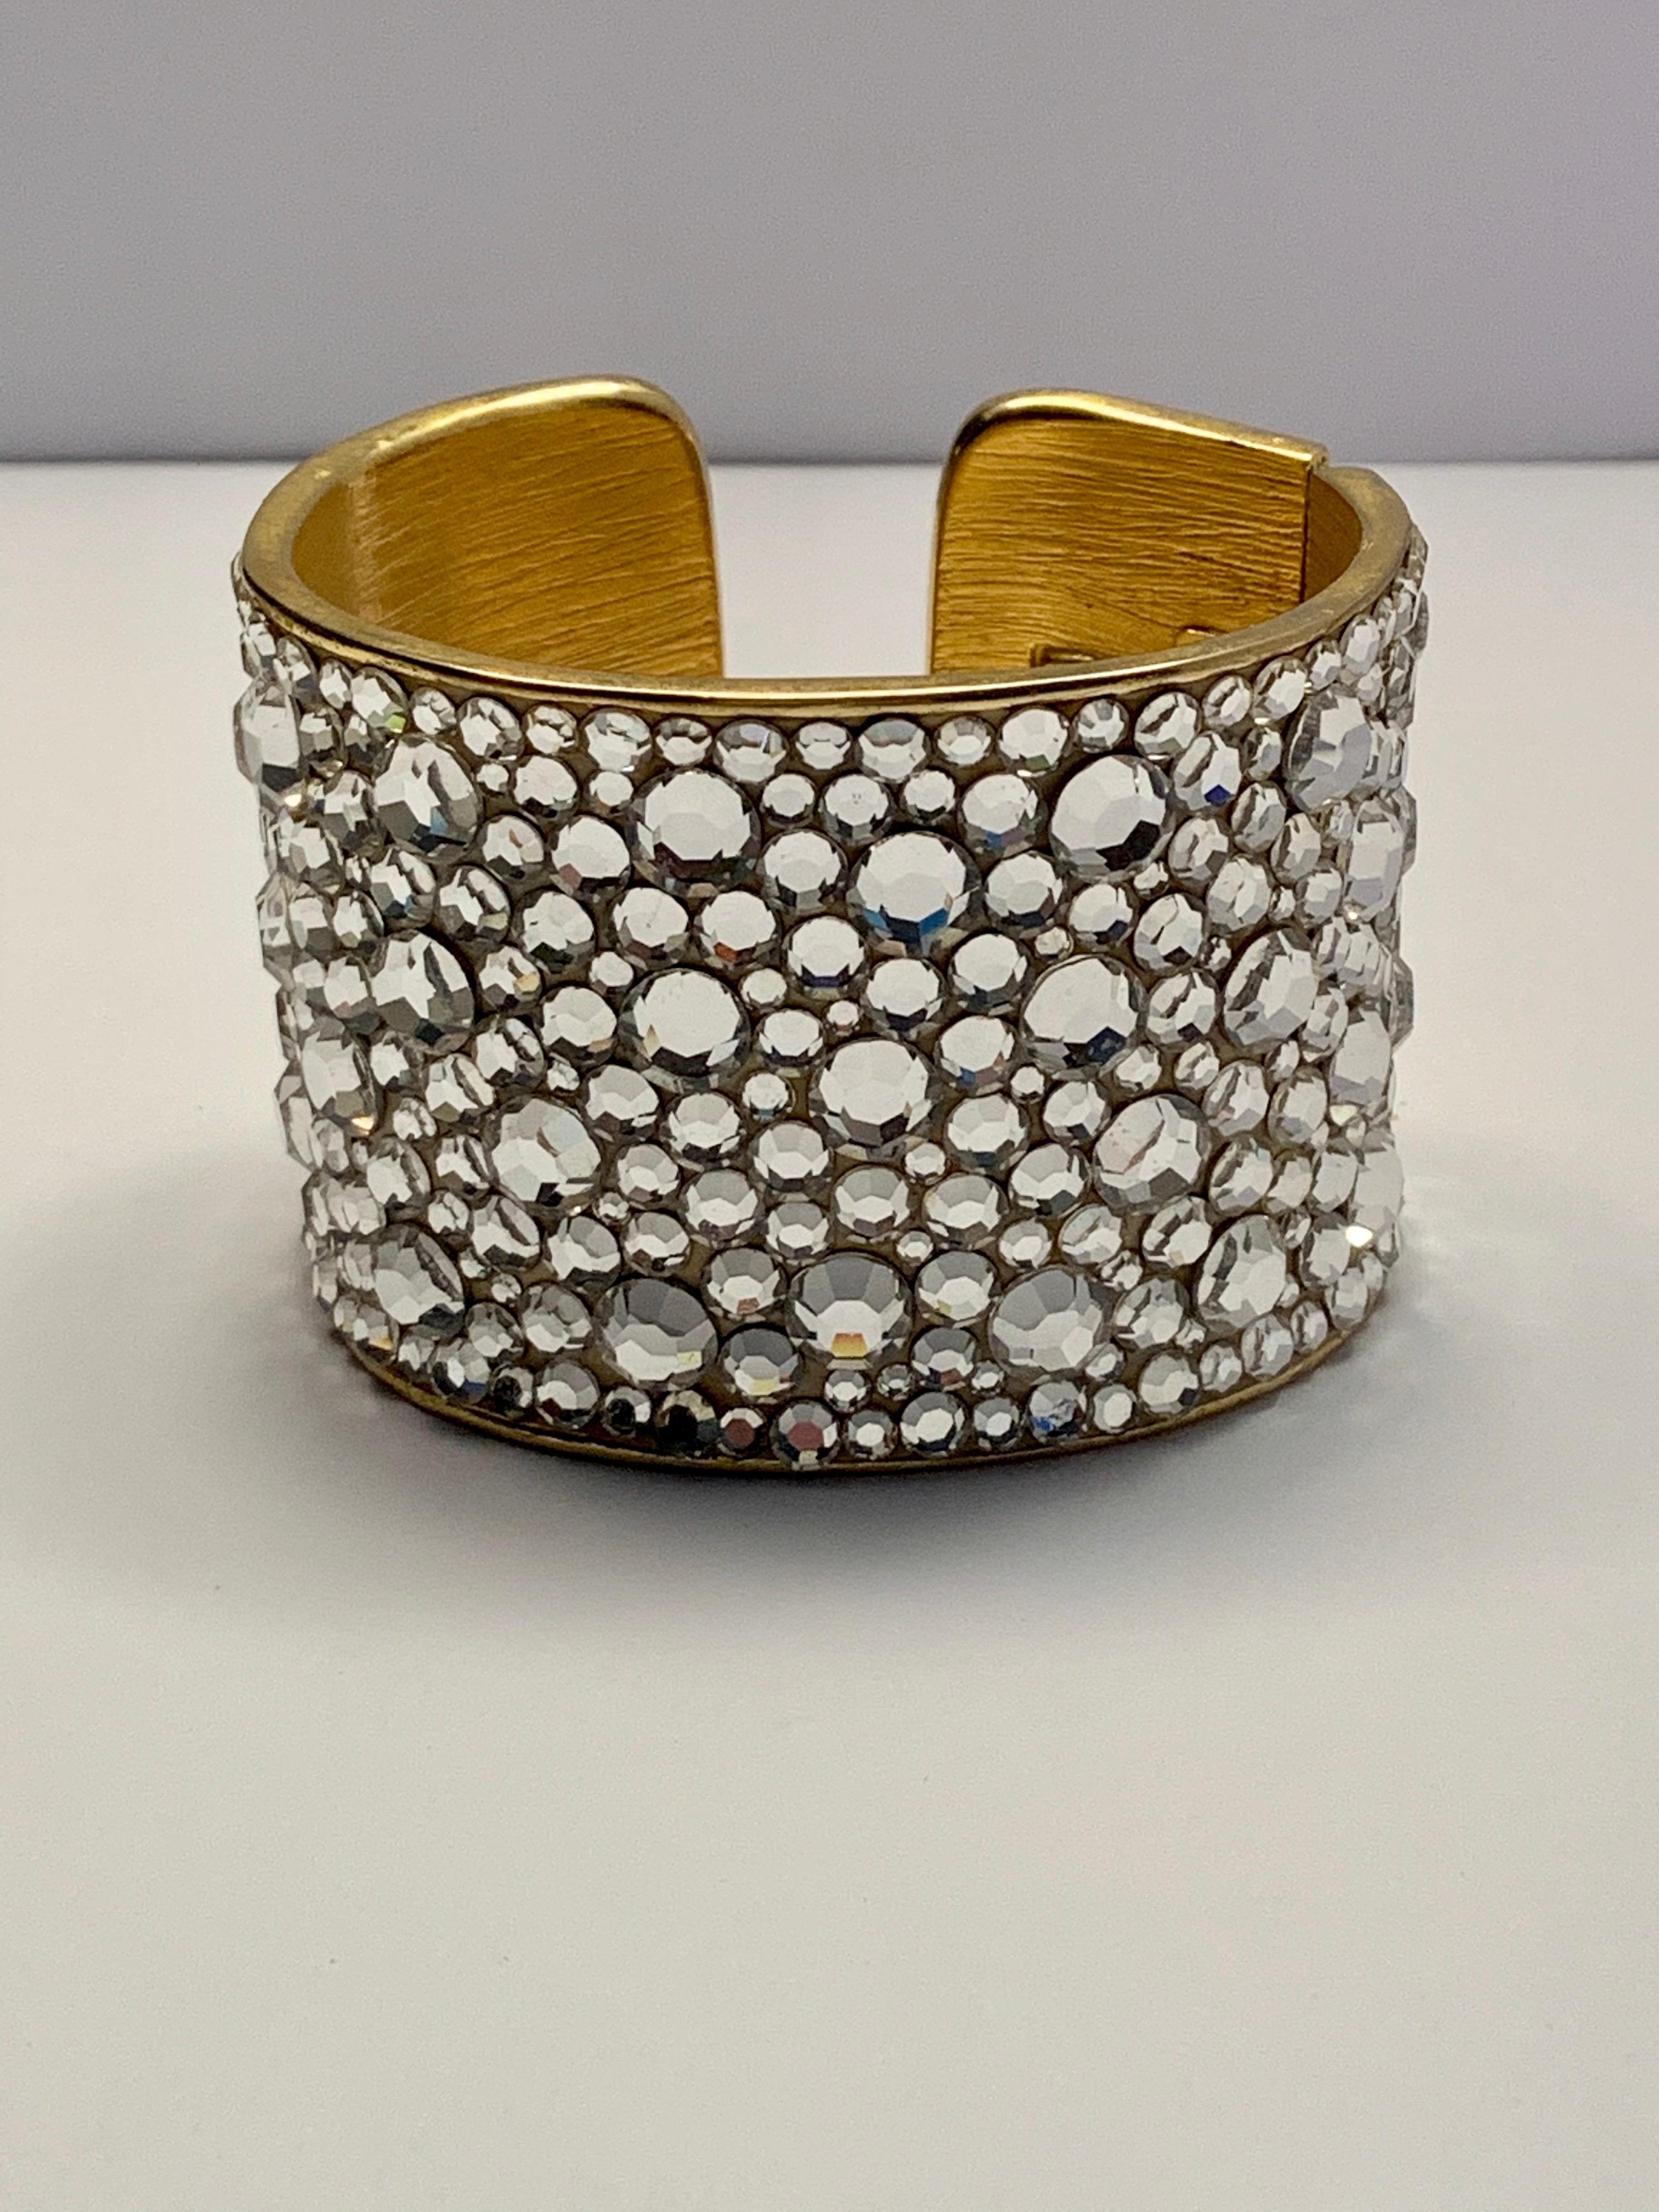 Fashion designer Pauline Trigere was a jewelry lover, and she designed and sold fashion jewelry as well as fine jewelry. This stunning cuff is from her fashion jewelry line. It is covered with faceted rhinestones in various sizes. It catches the